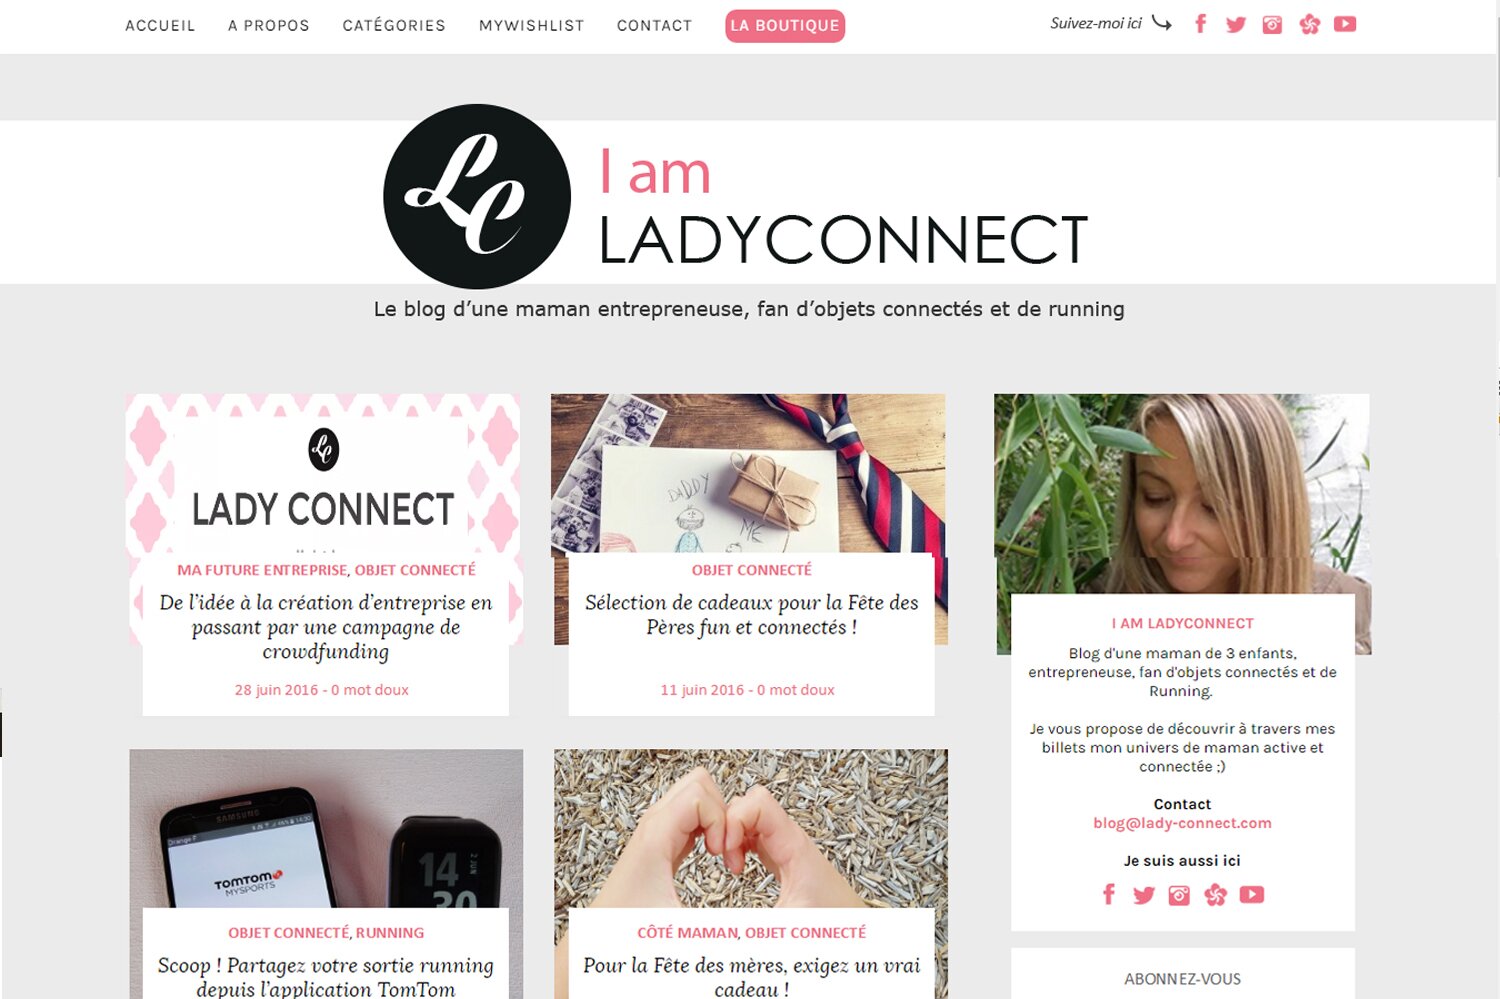 ladyconnect